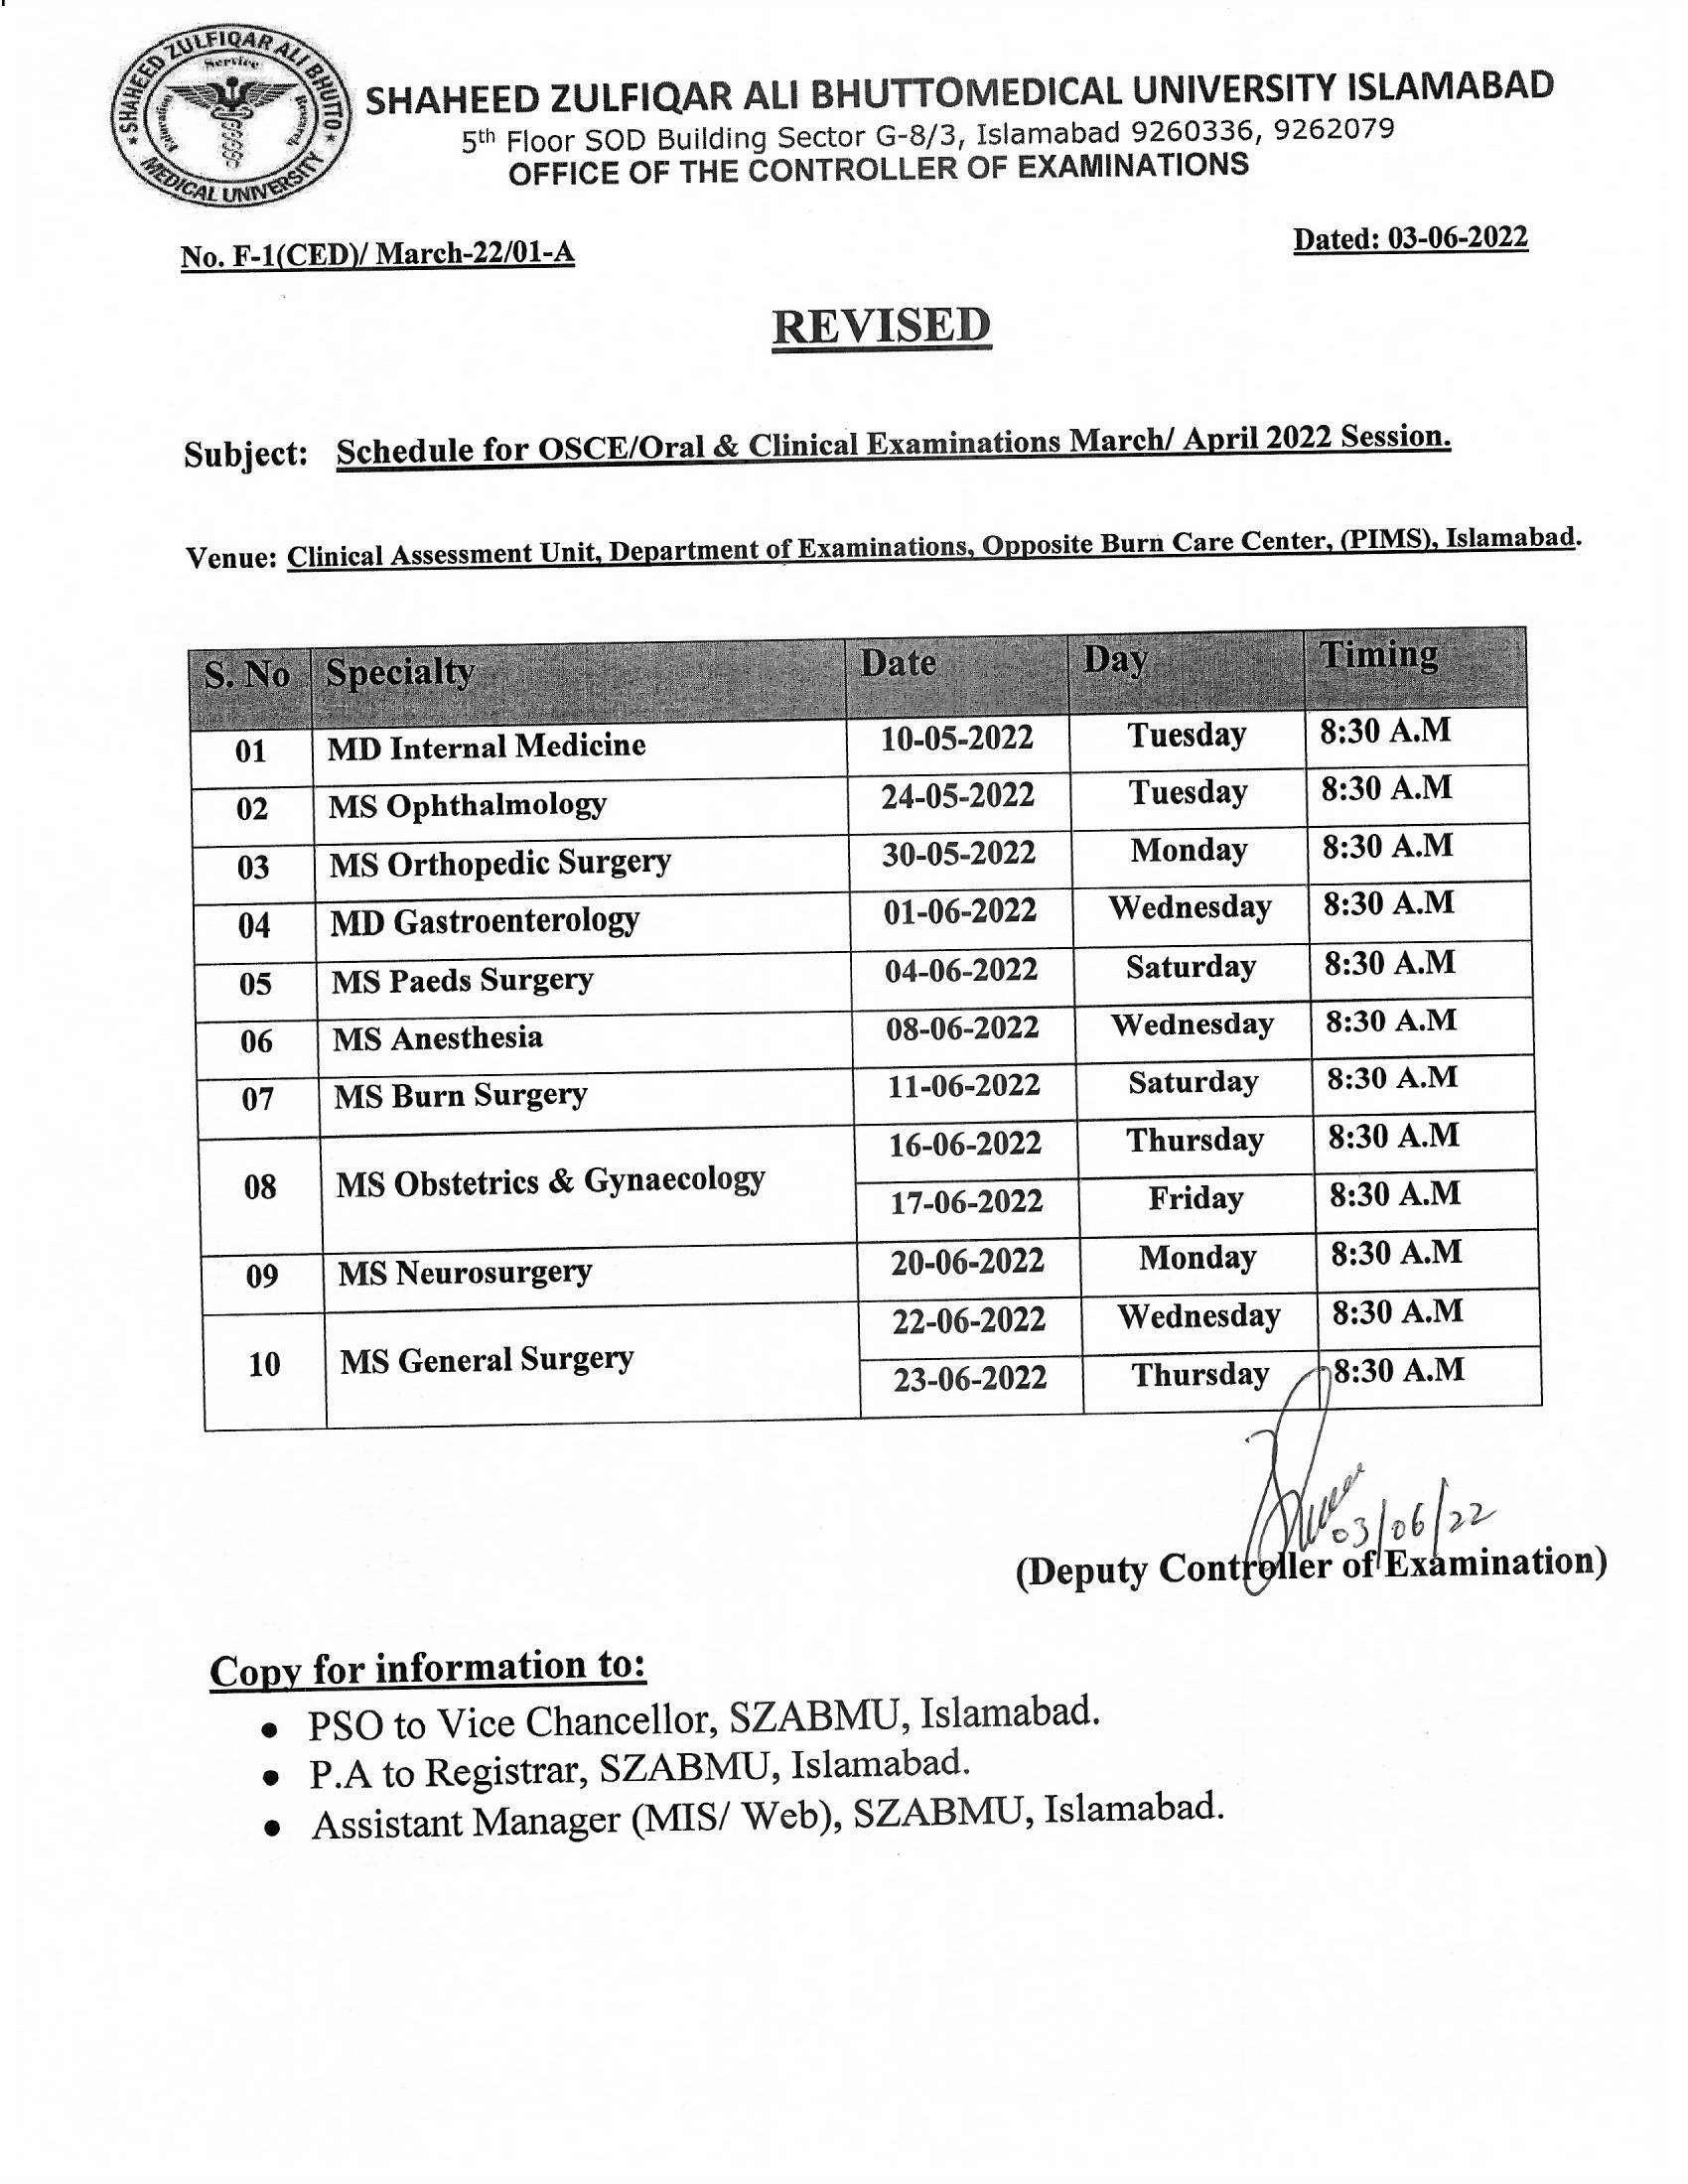 Revised - Schedule for OSCE/Oral & Clinical Examinations March/April 2022